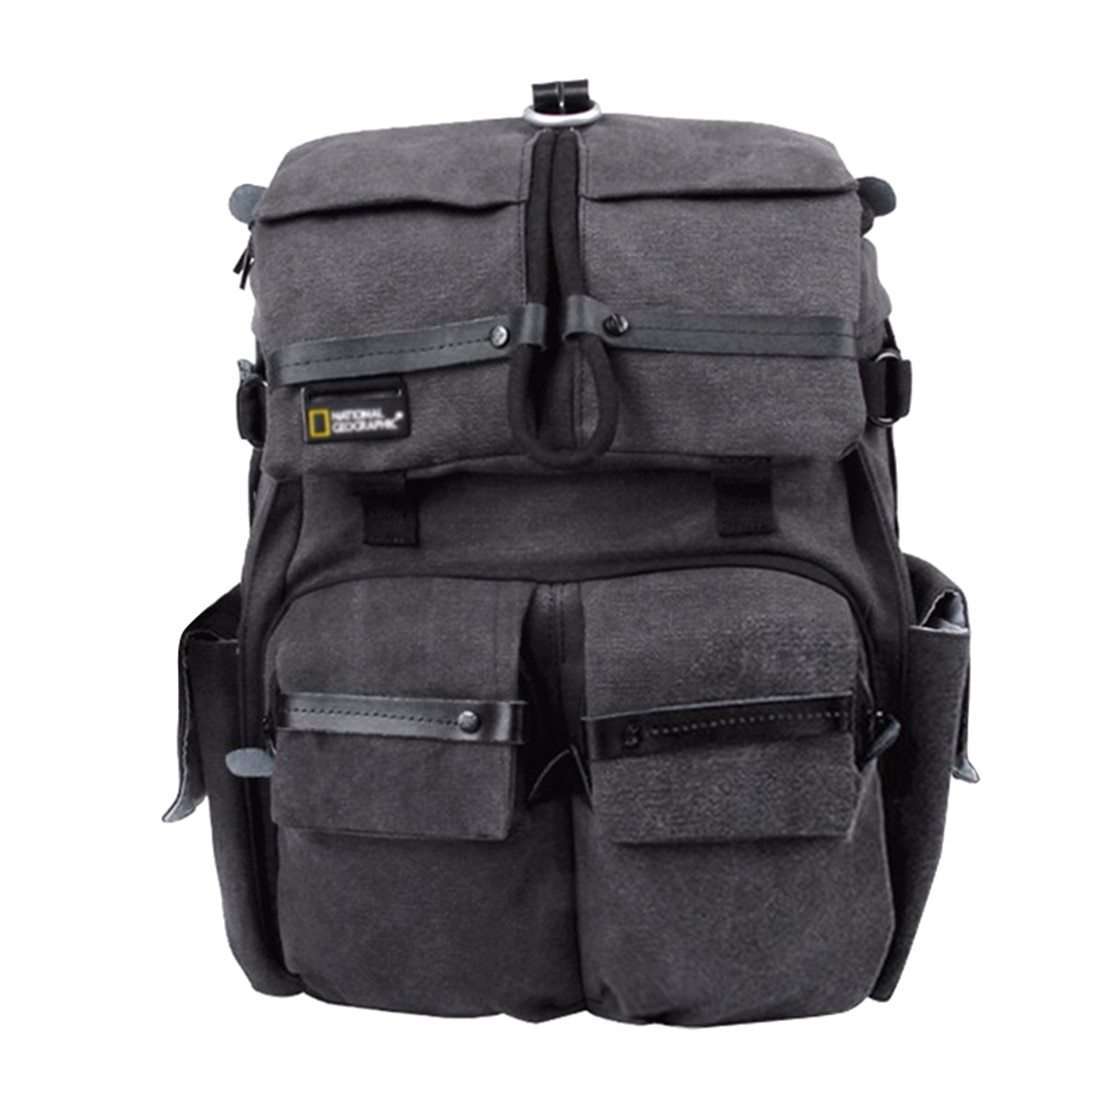 Sydney Series One Camera Backpack